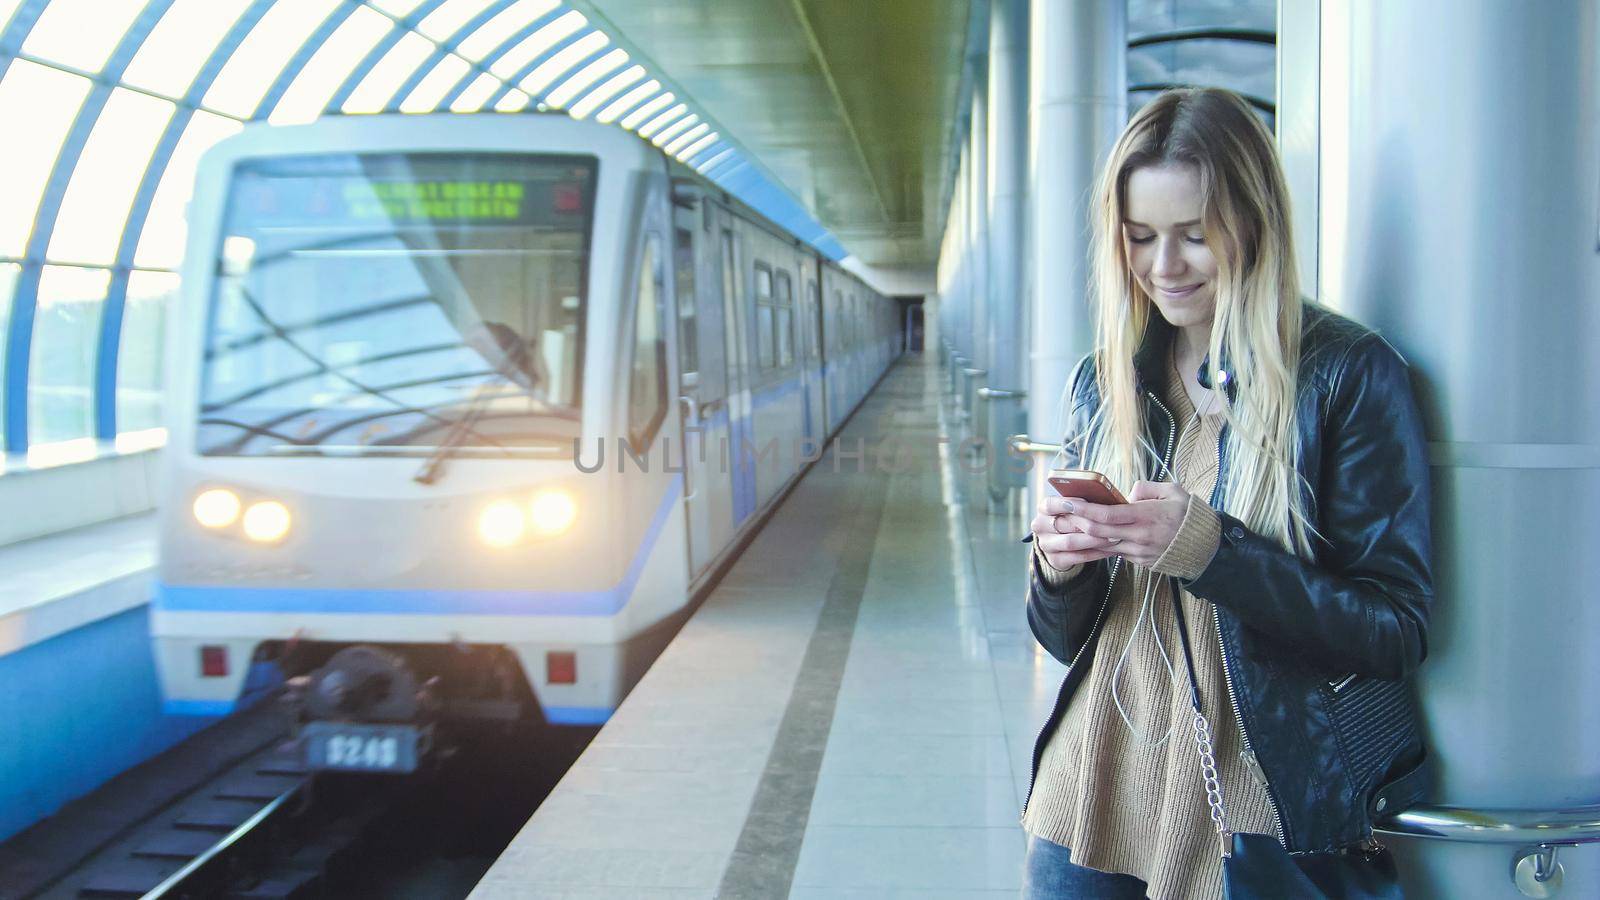 Young girl with gadget long blonde hair in leather jacket straightens standing in metro against the background of a train coming, perspective by Studia72